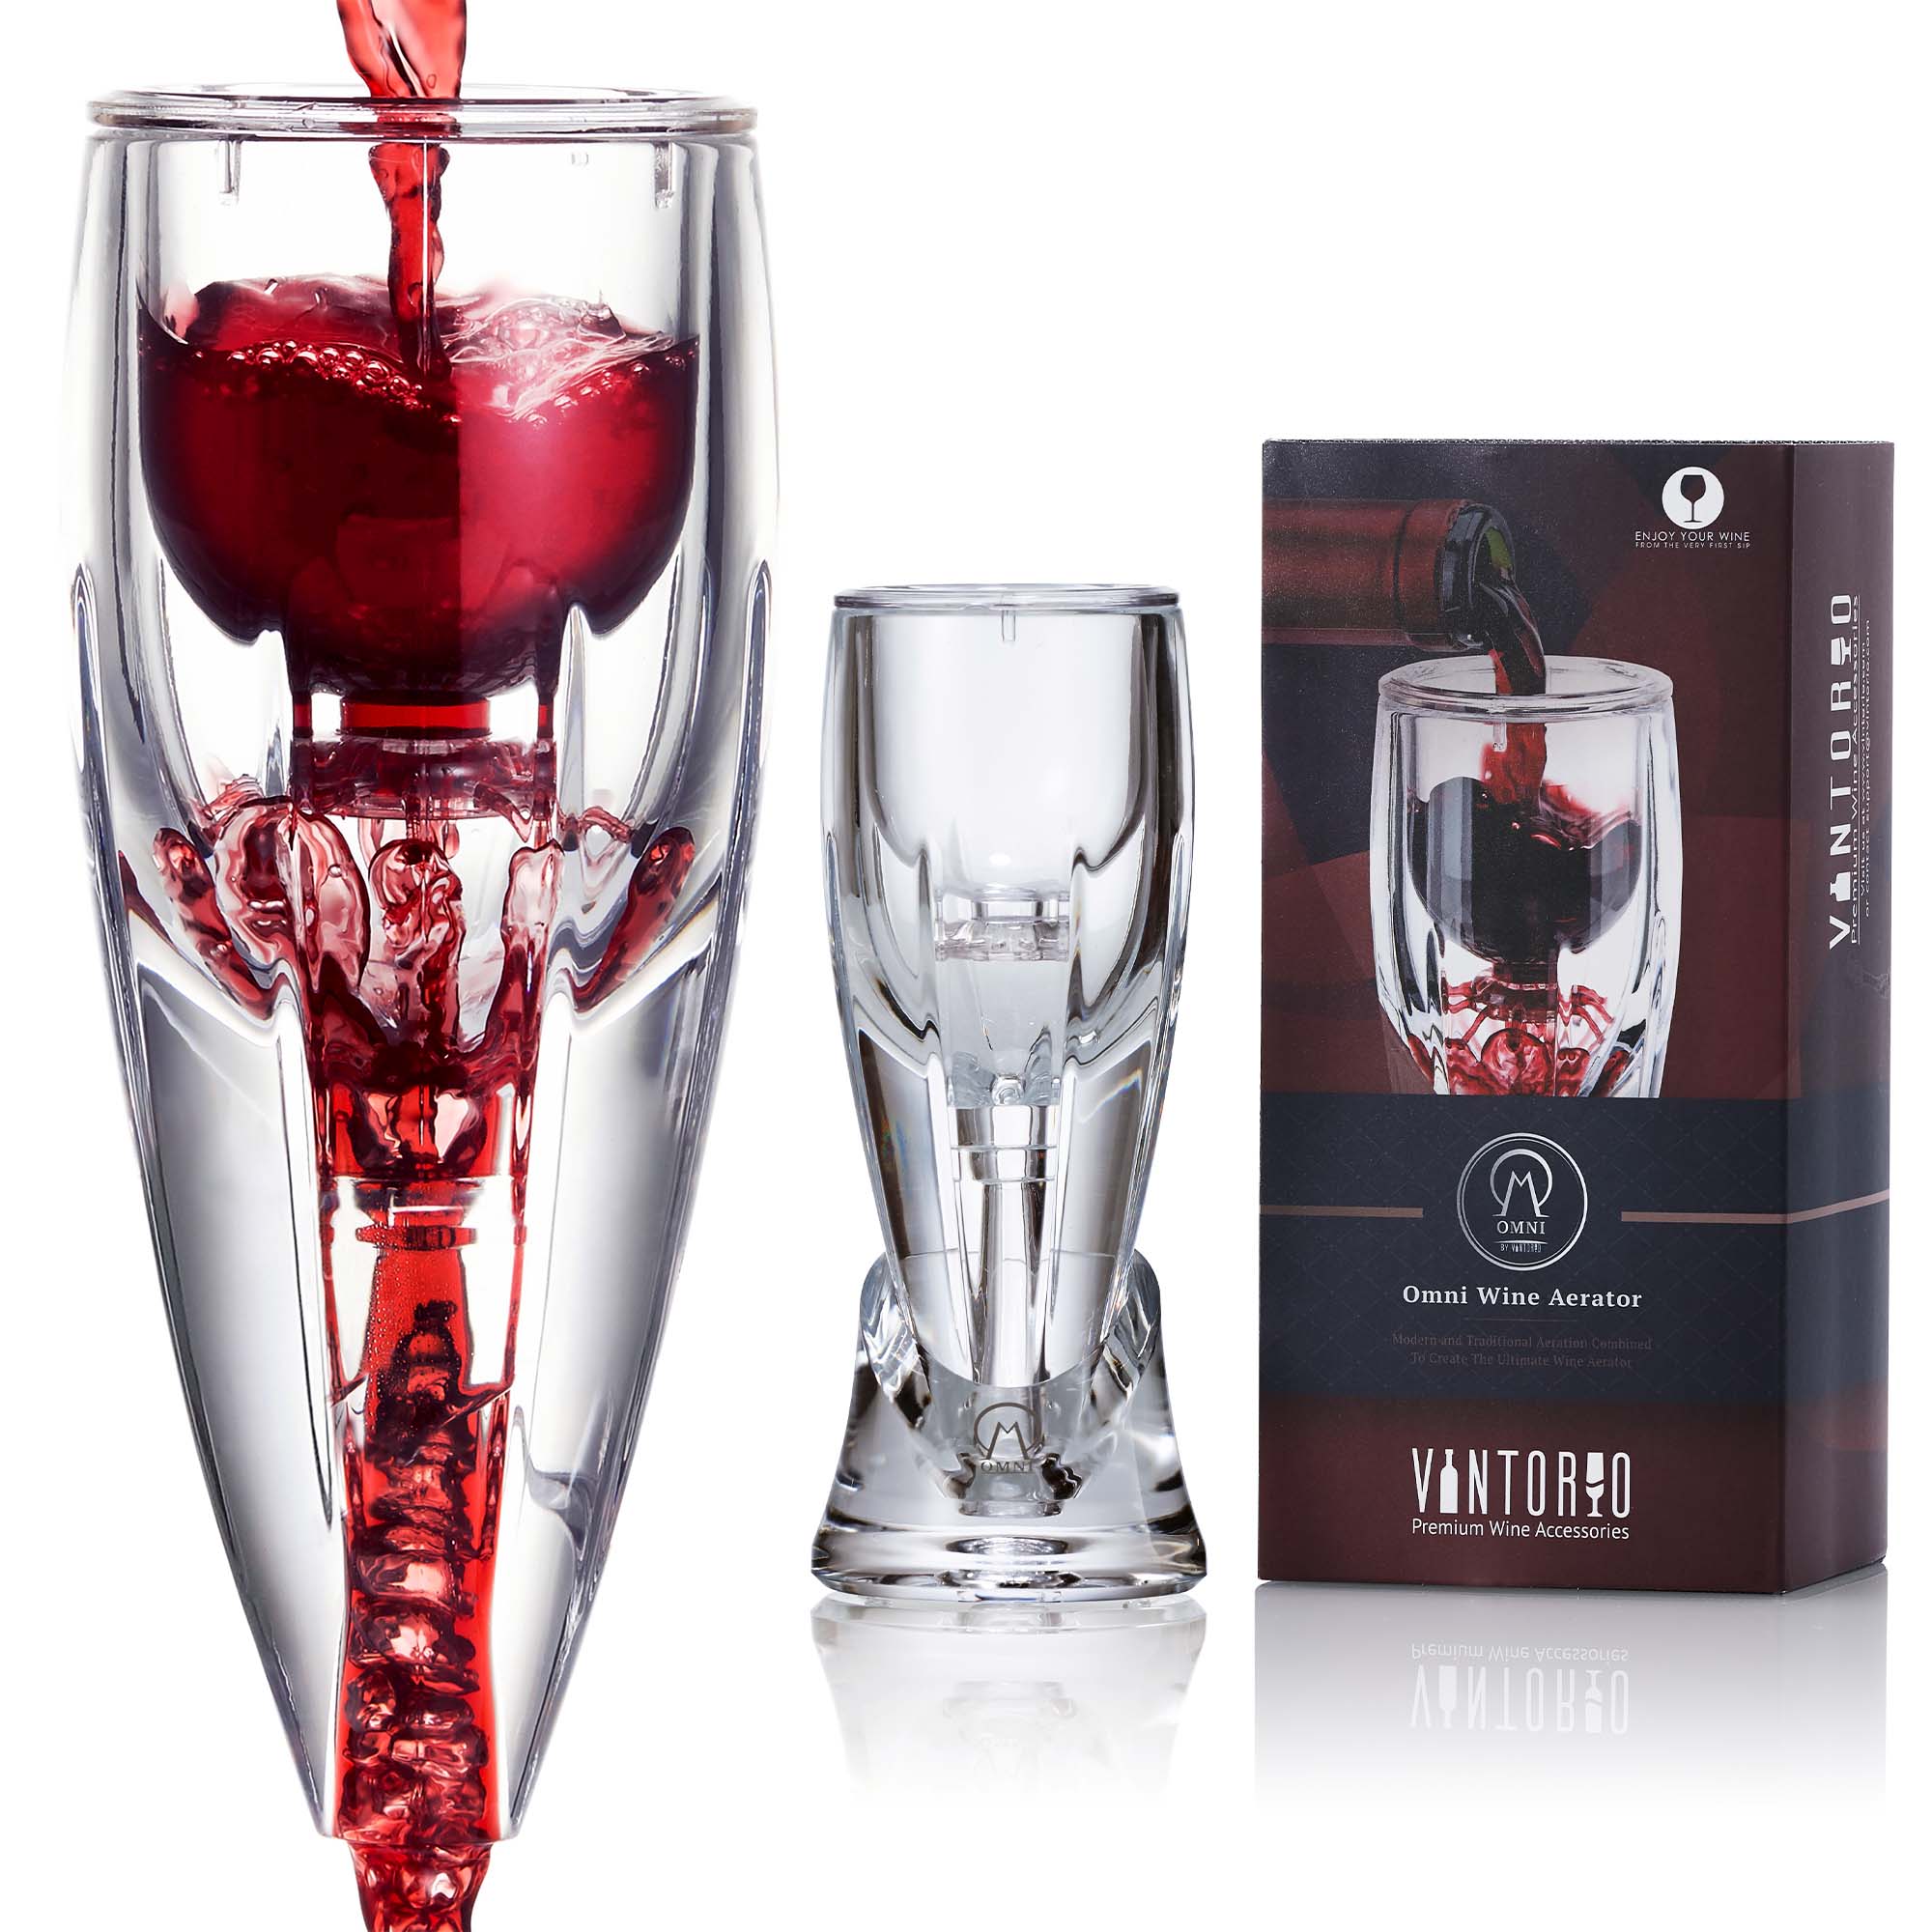 Vintorio Wine Aerator - Omni Edition with Gift Packaging and Travel Pouch